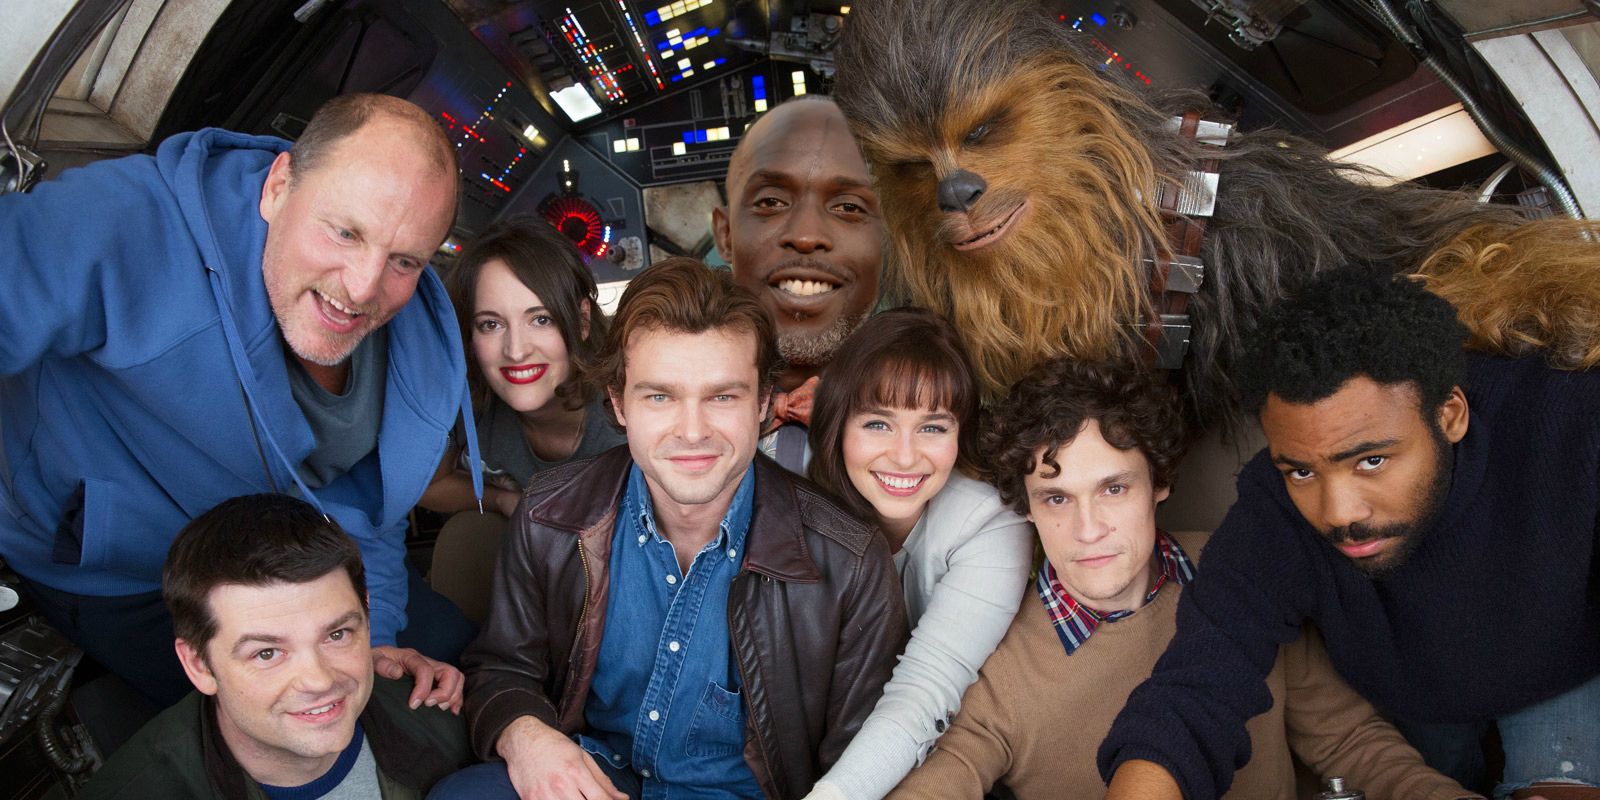 Michael K. Williams with Han Solo cast